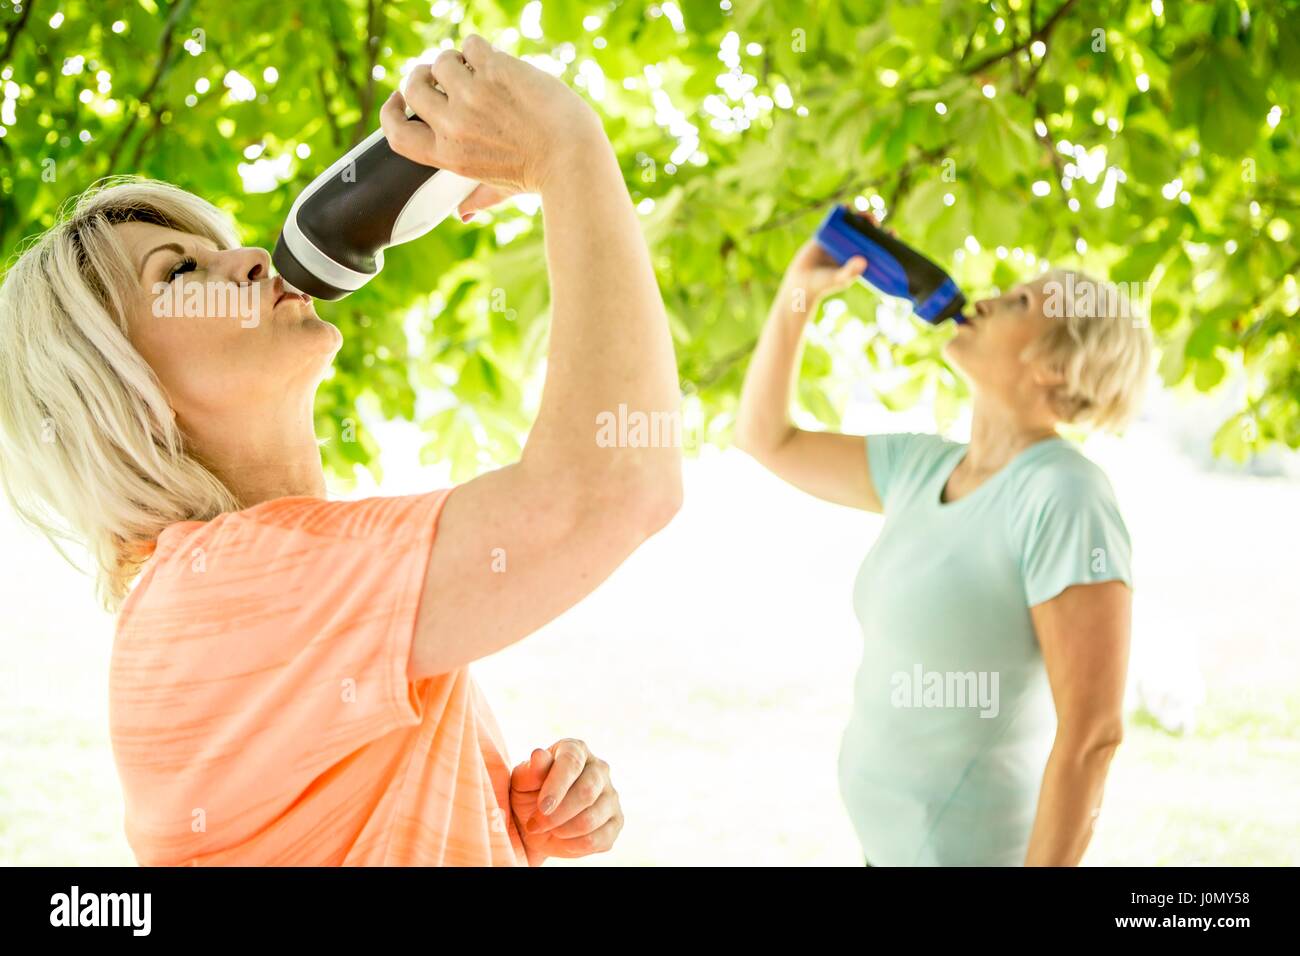 Two women drinking water from sports bottles. Stock Photo